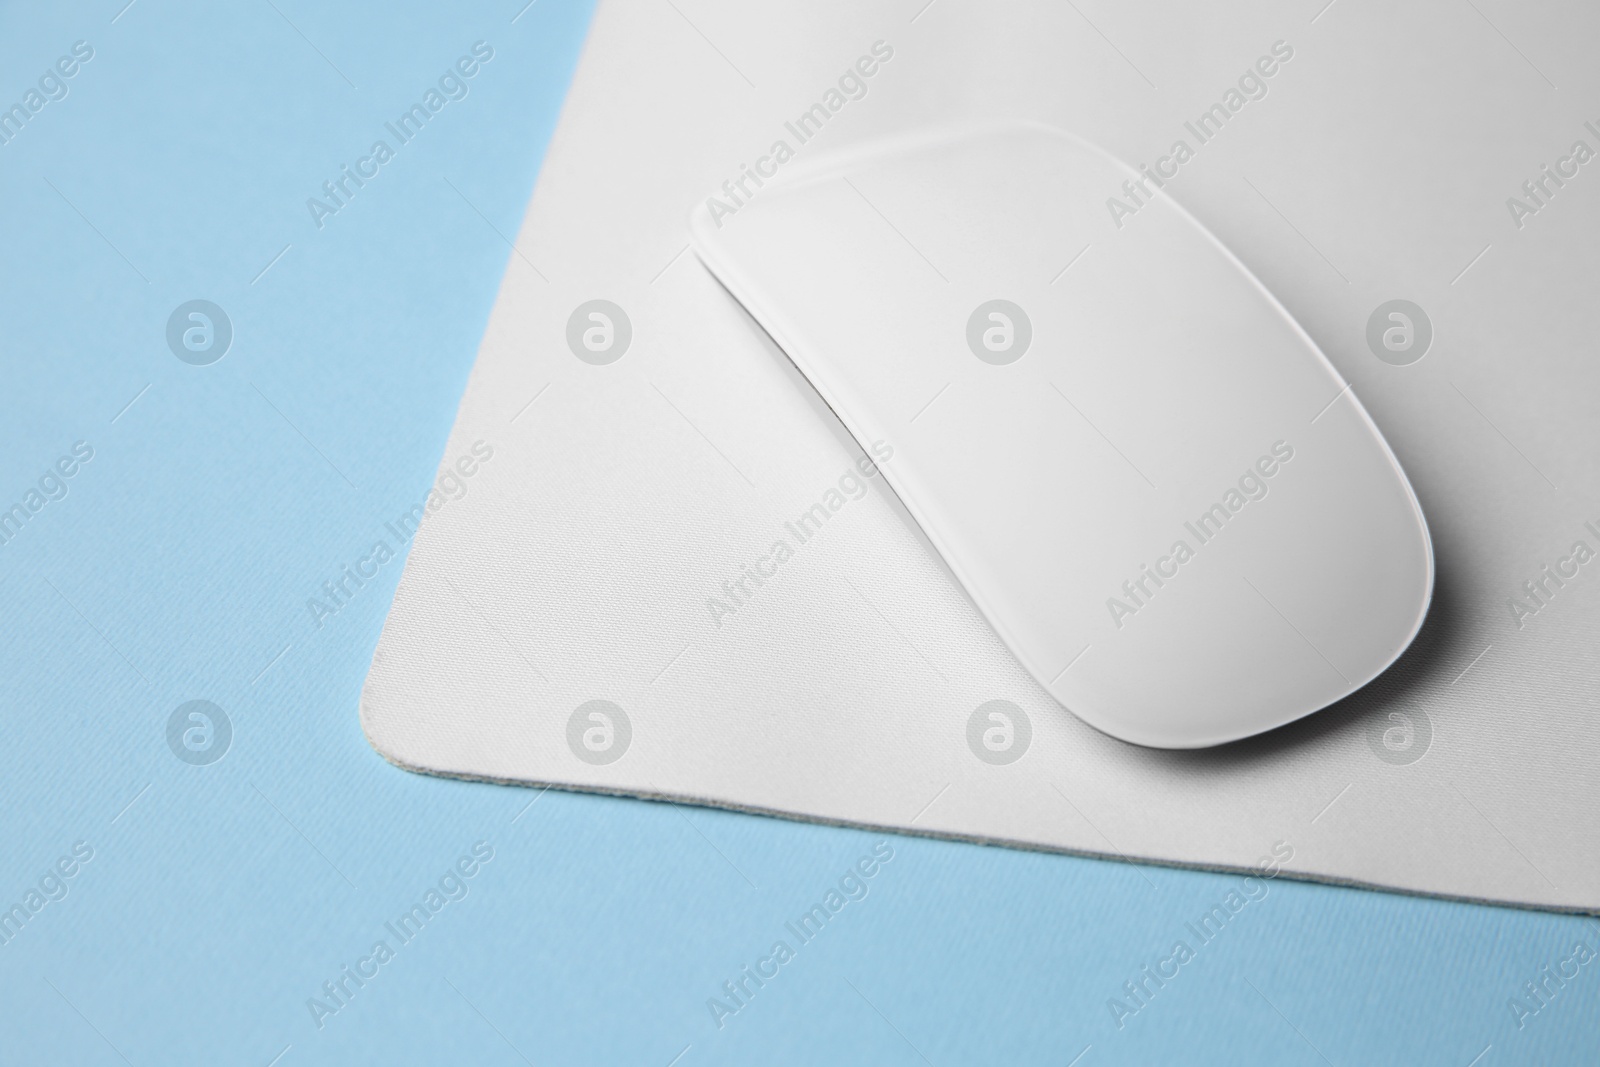 Photo of One wireless mouse with mousepad on light blue background